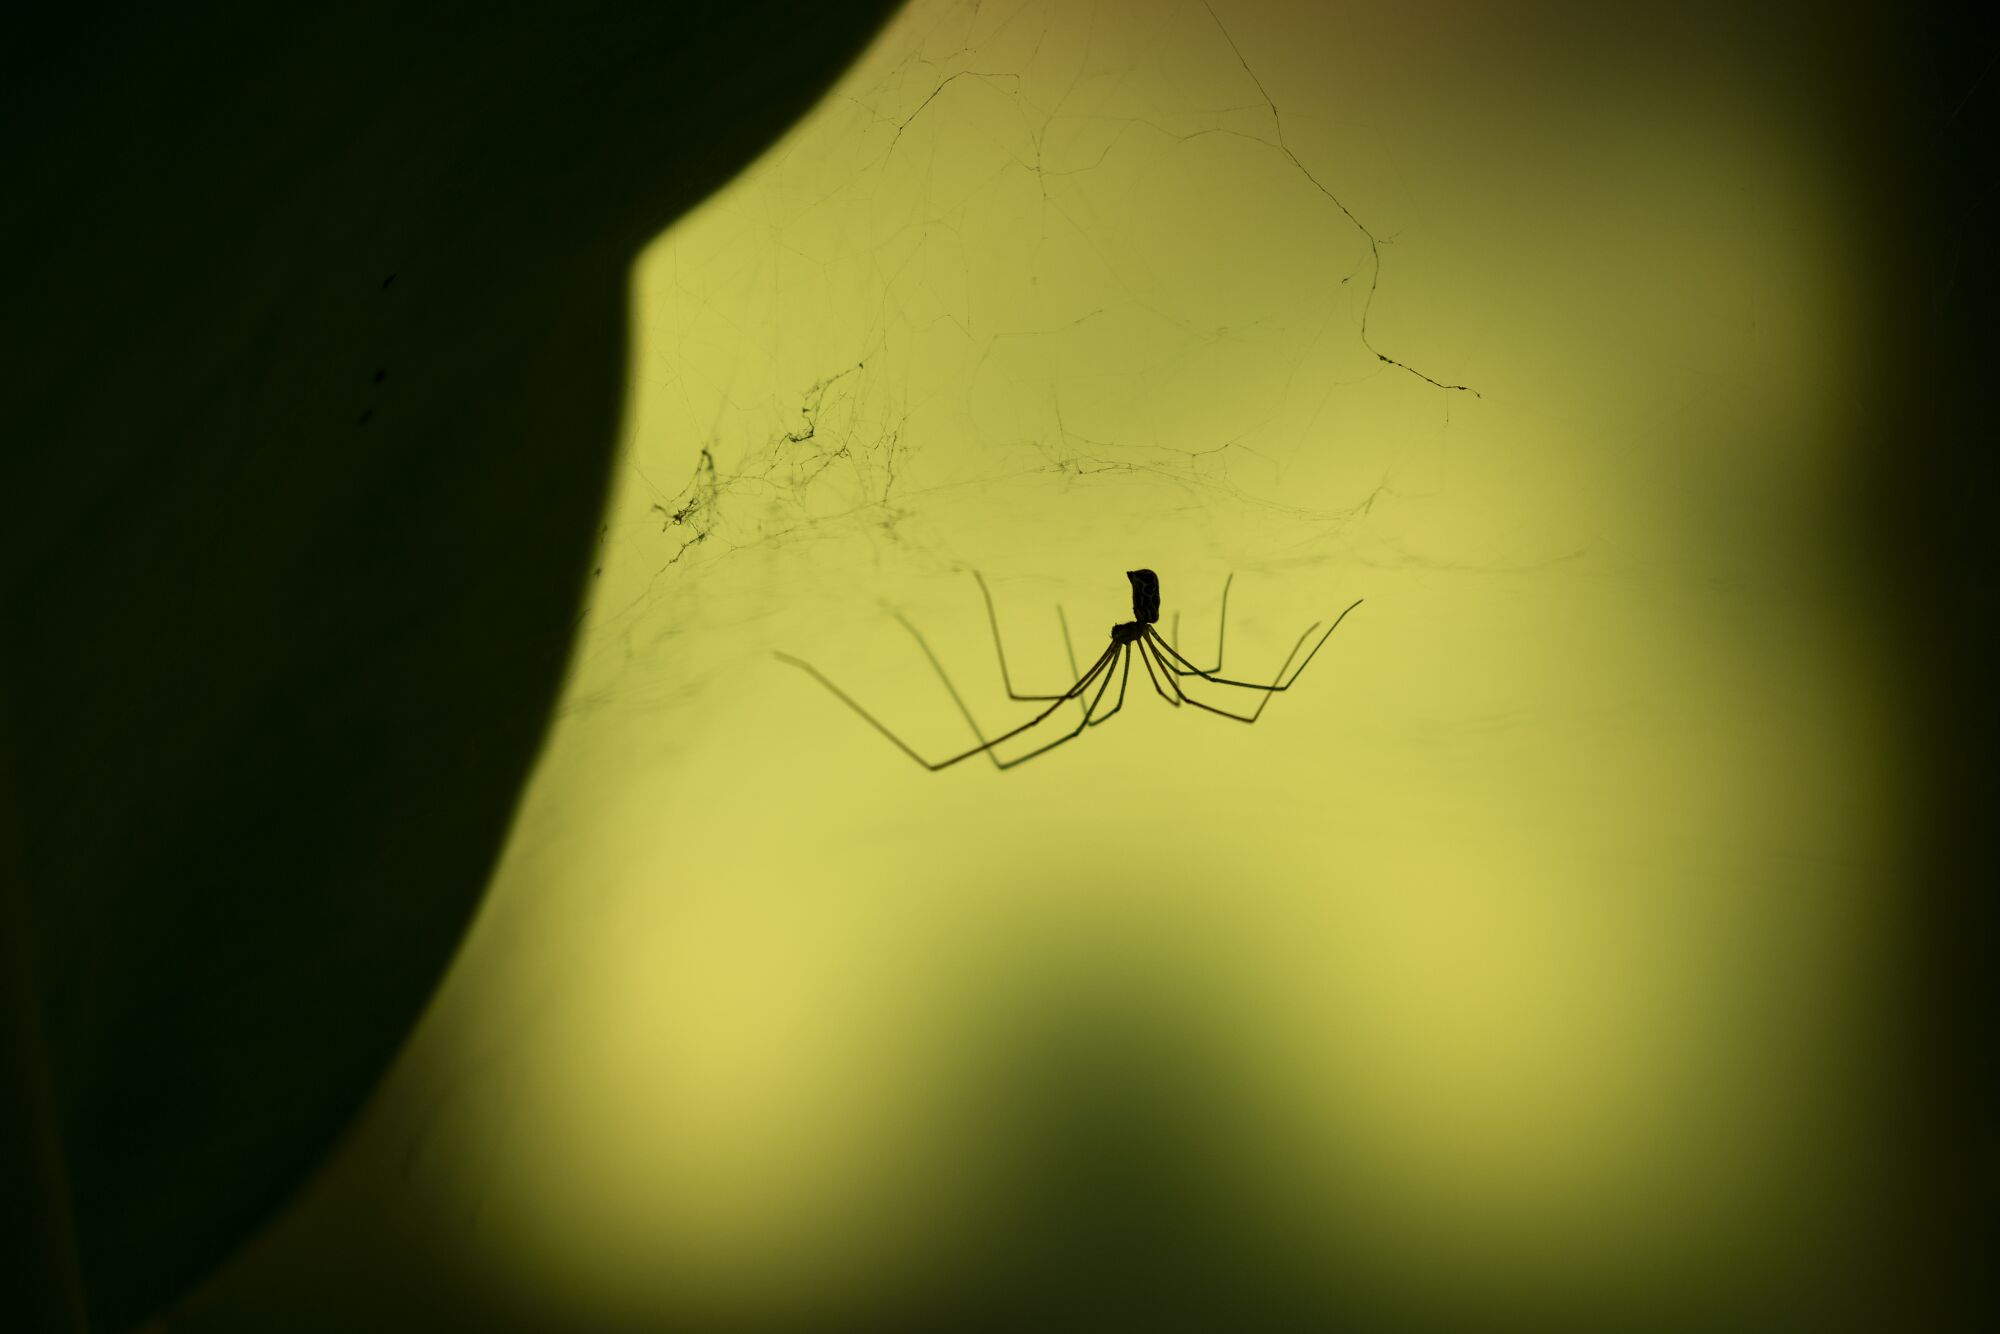 A spider appears in silhouette against a yellow background.